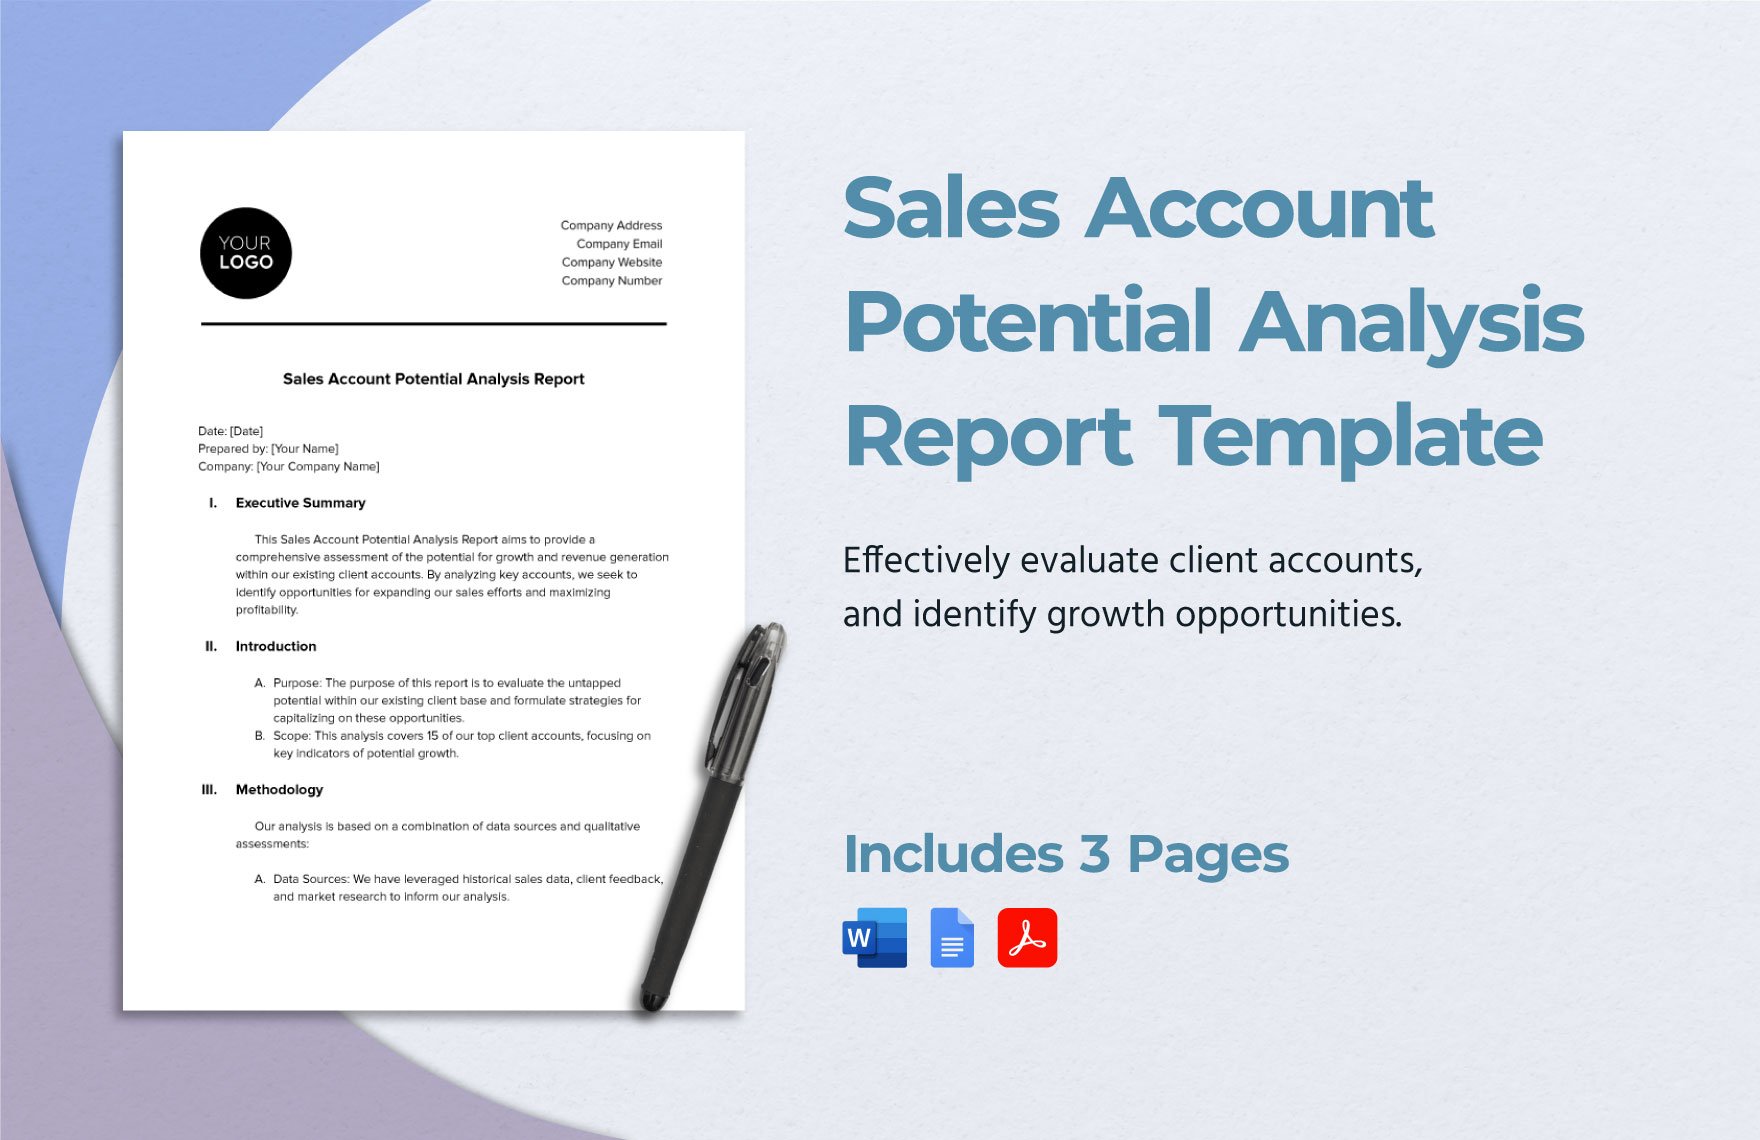 Sales Account Potential Analysis Report Template